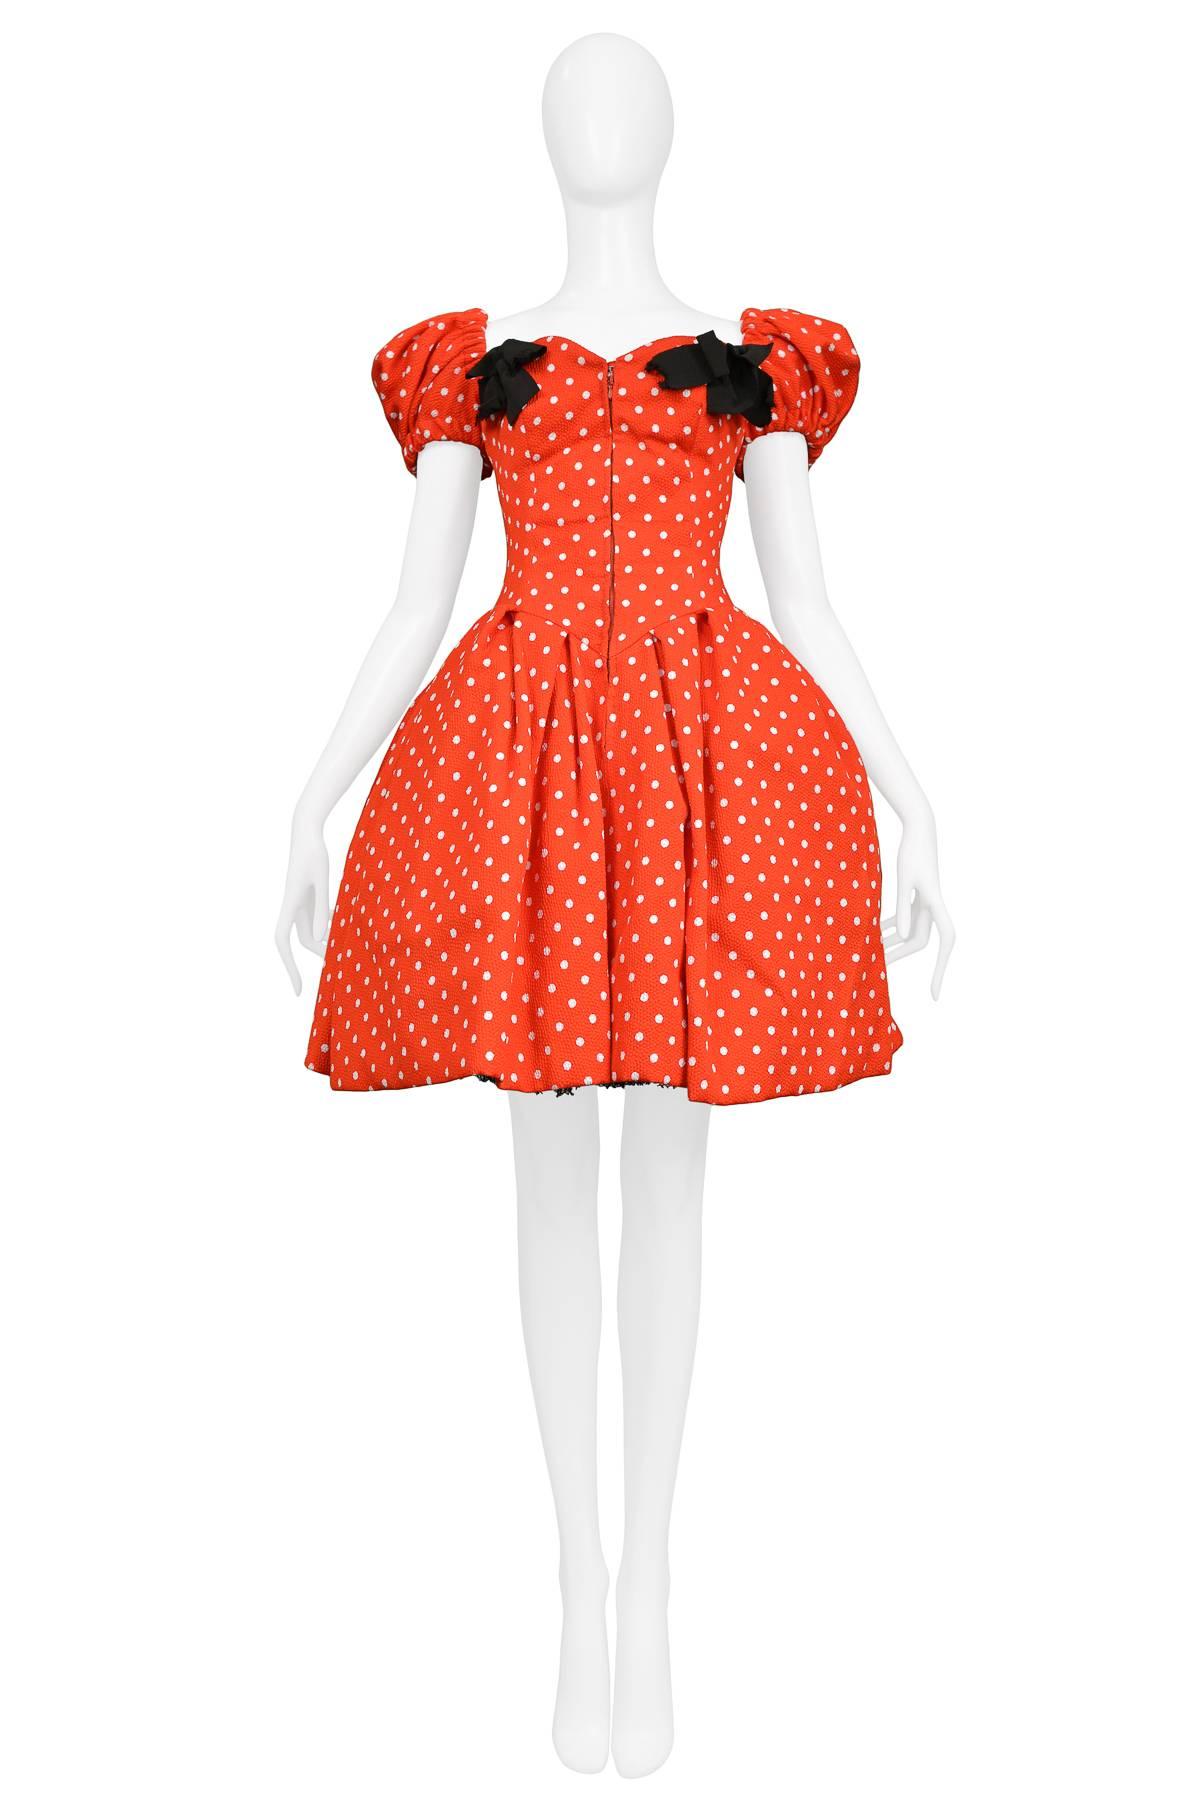 Vintage Christian Lacroix cotton blend cocktail dress featuring a red and white polka dot print, zippered front, puff sleeves, full skirt, inner corseted waist and two black grosgrain bows adorning the bust. Runway piece from the 1988 Spring/Summer